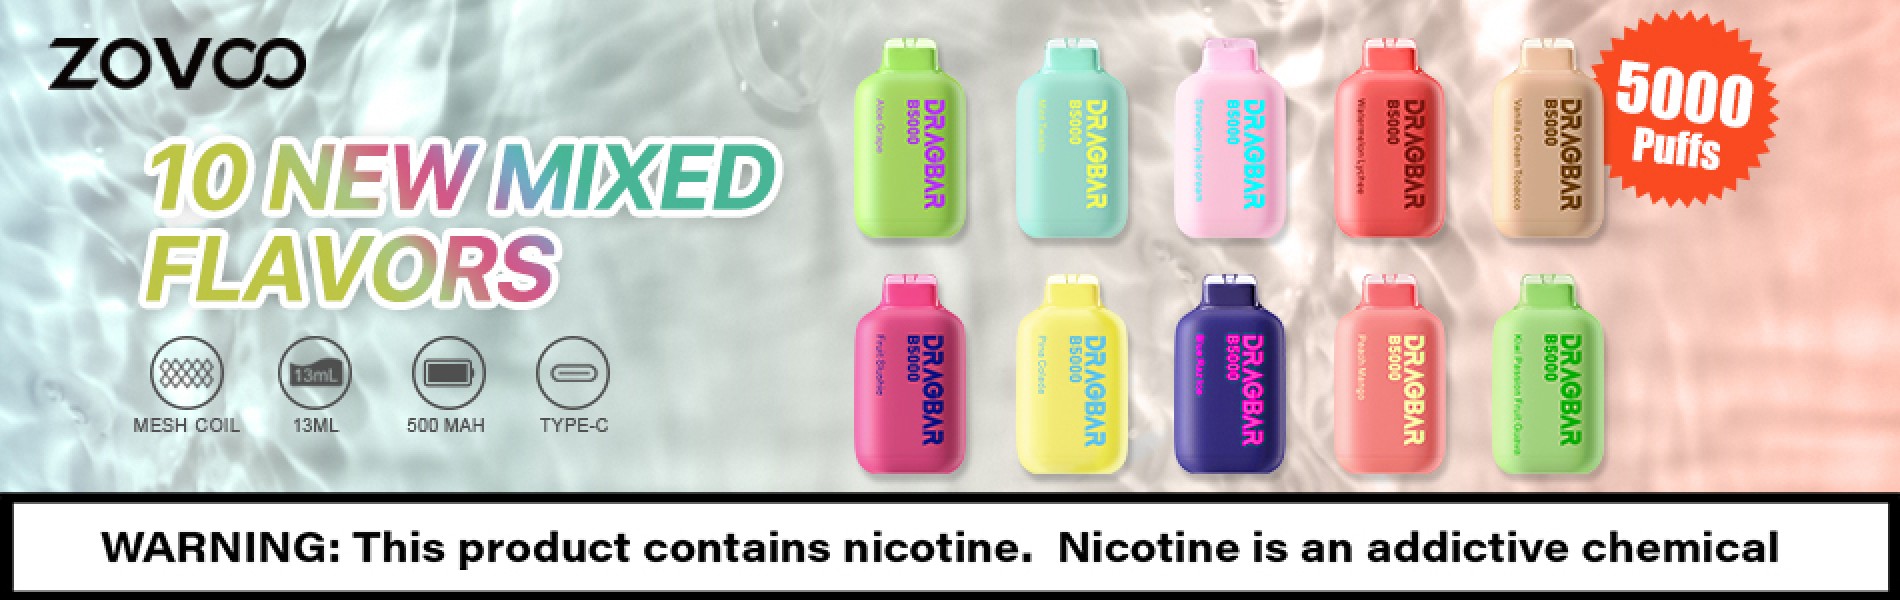 Zovoo - 5000 Puff Disposables In 10 New Mixed Flavors